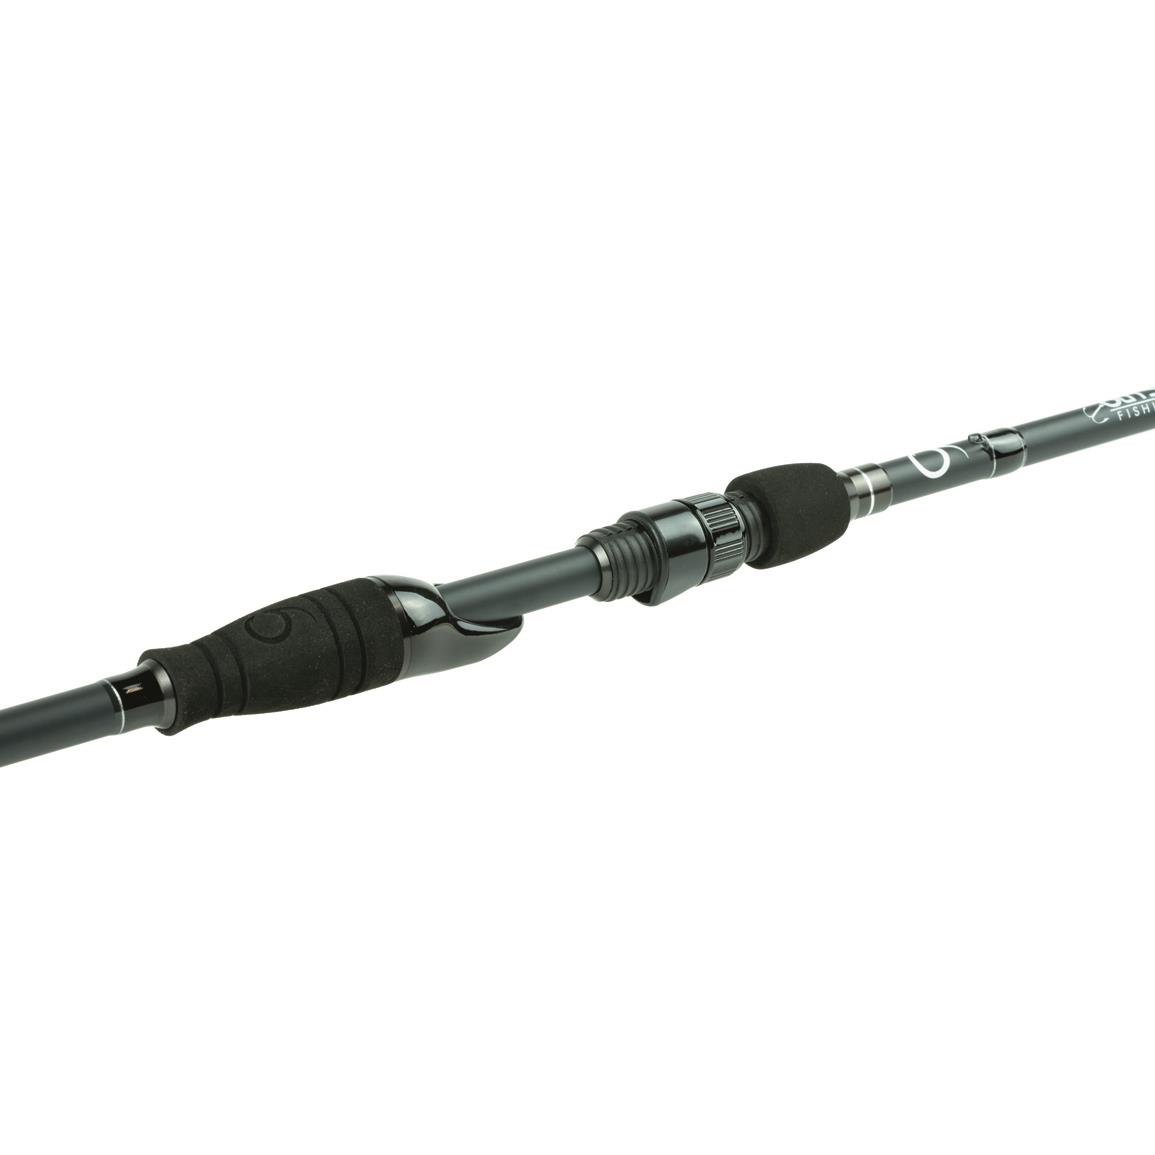 ACC Crappie Stix GS76SG Green Series Dock Shooter Spinning Rod, 7'6  Length, Medium Power, Moderate - 737609, Spinning Rods at Sportsman's Guide